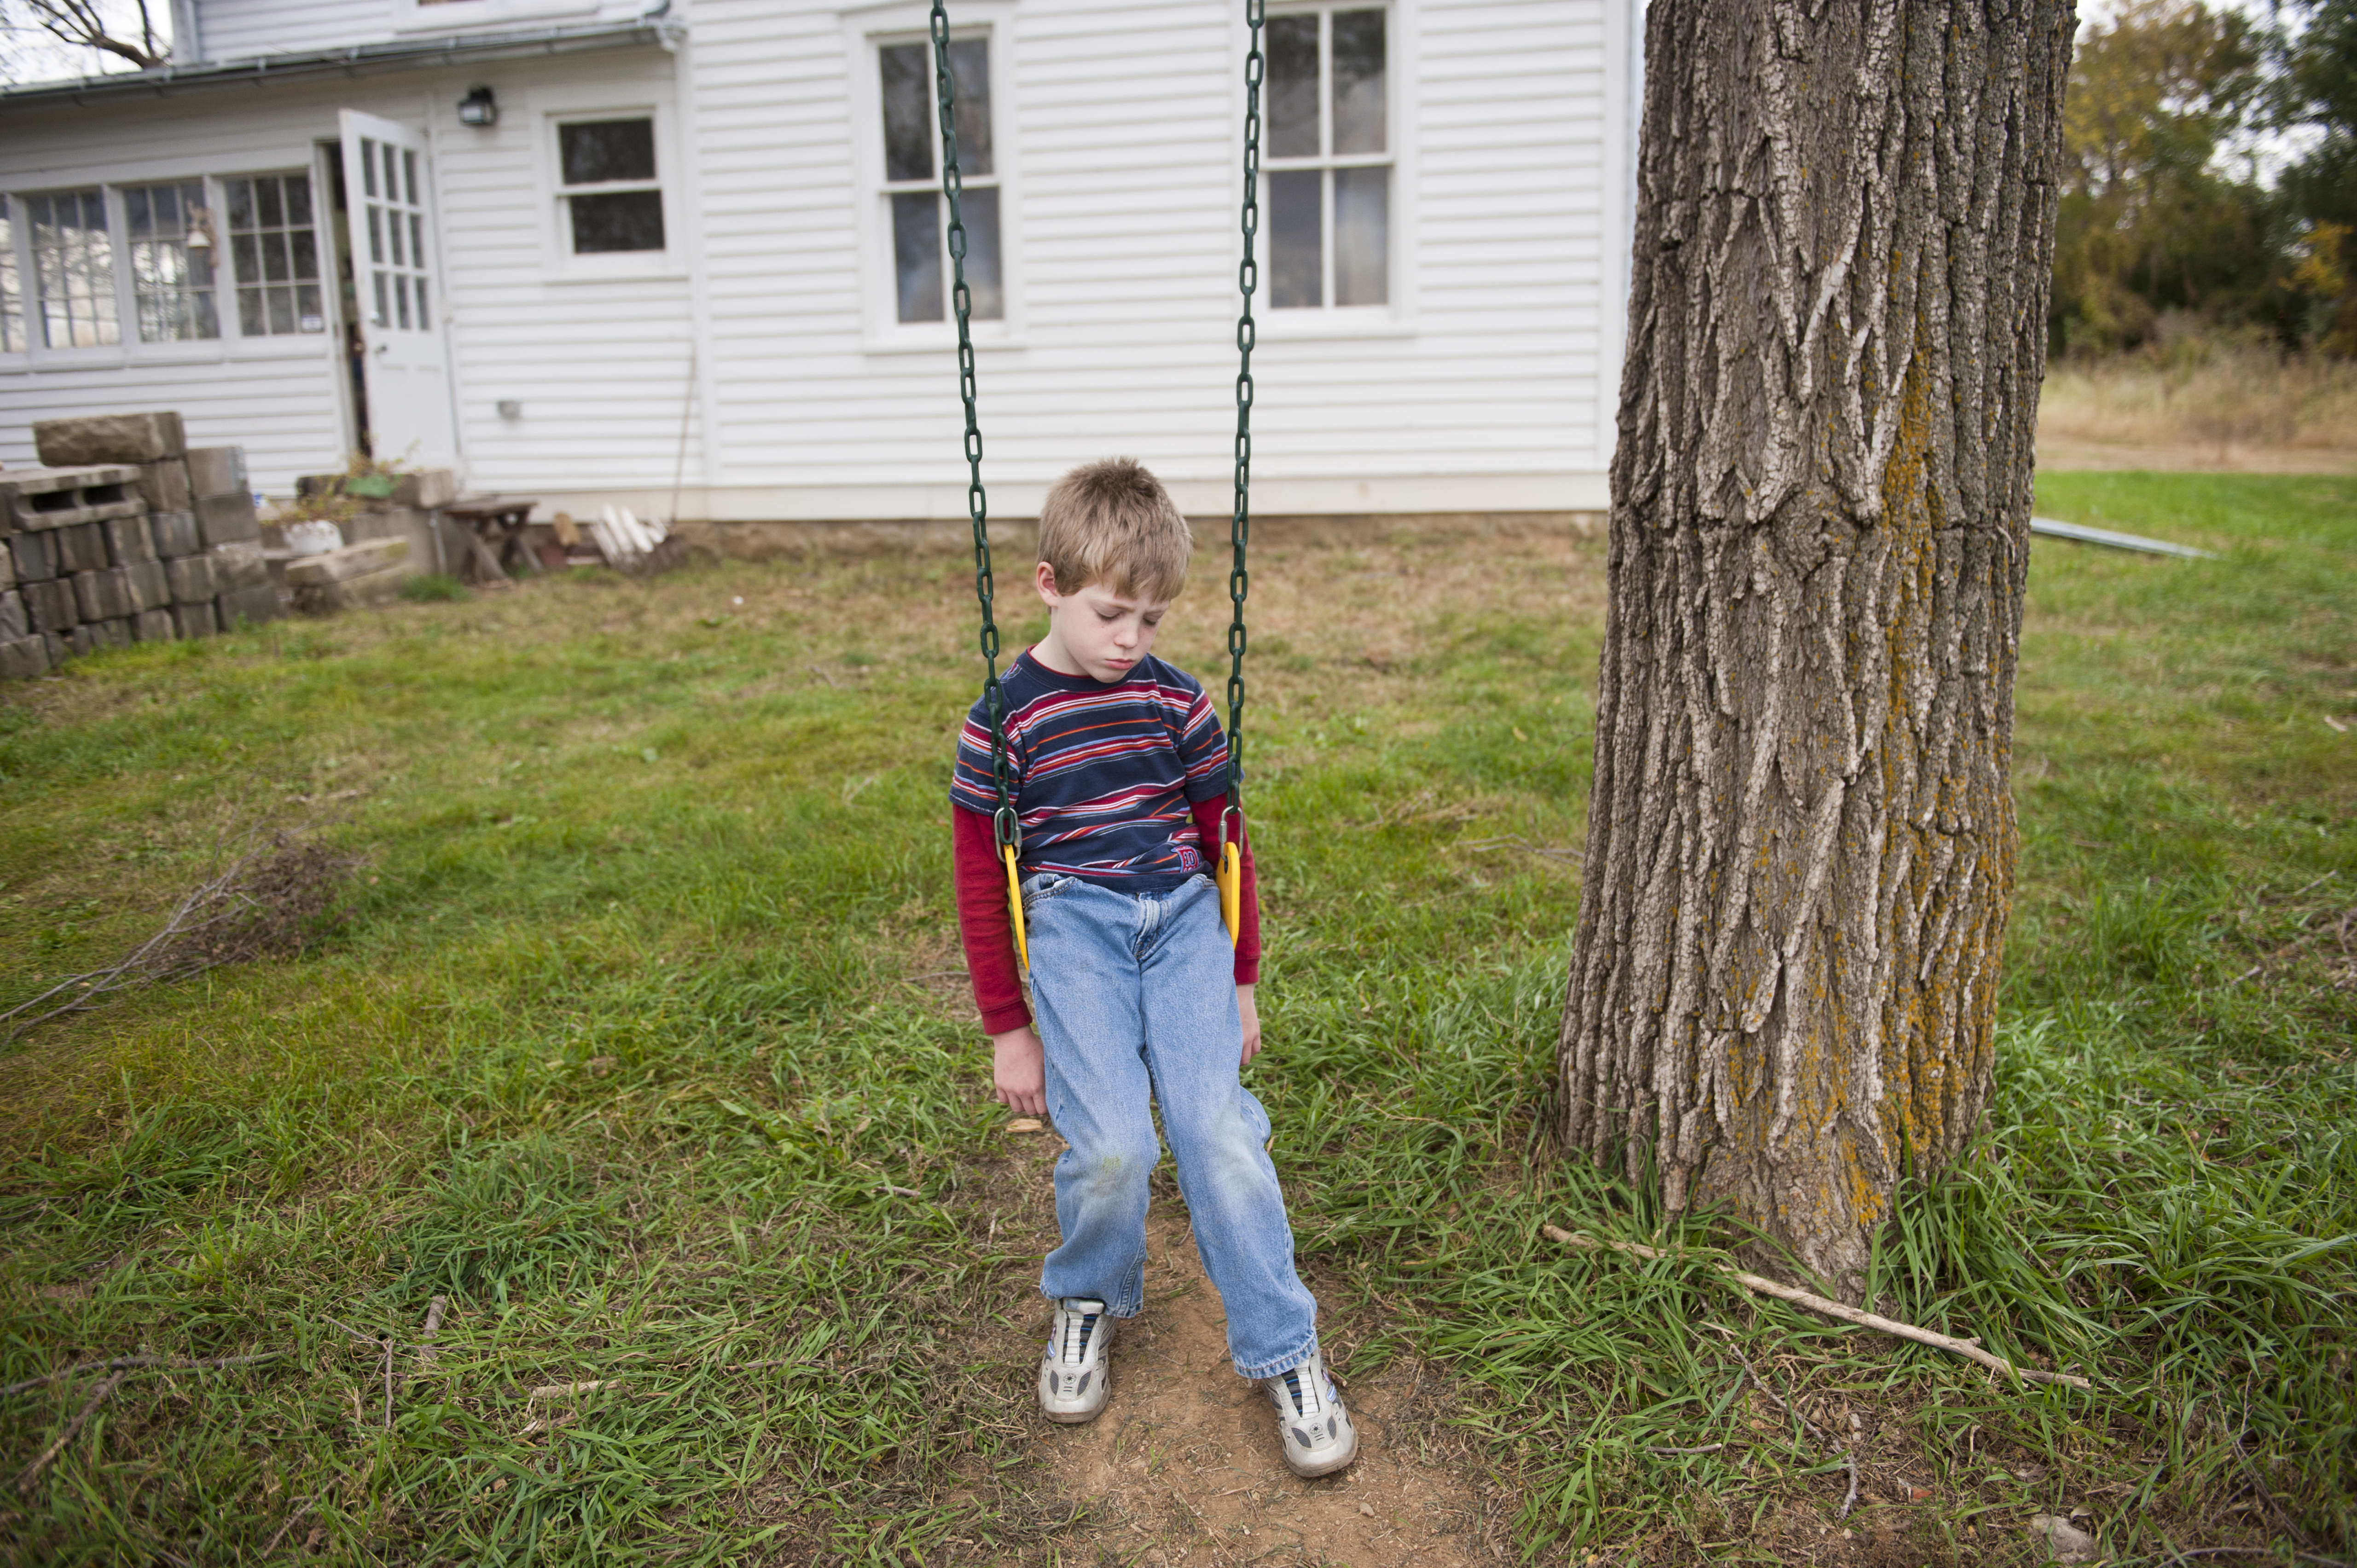 A young boy pouts on a swing in Dunbar, NE.